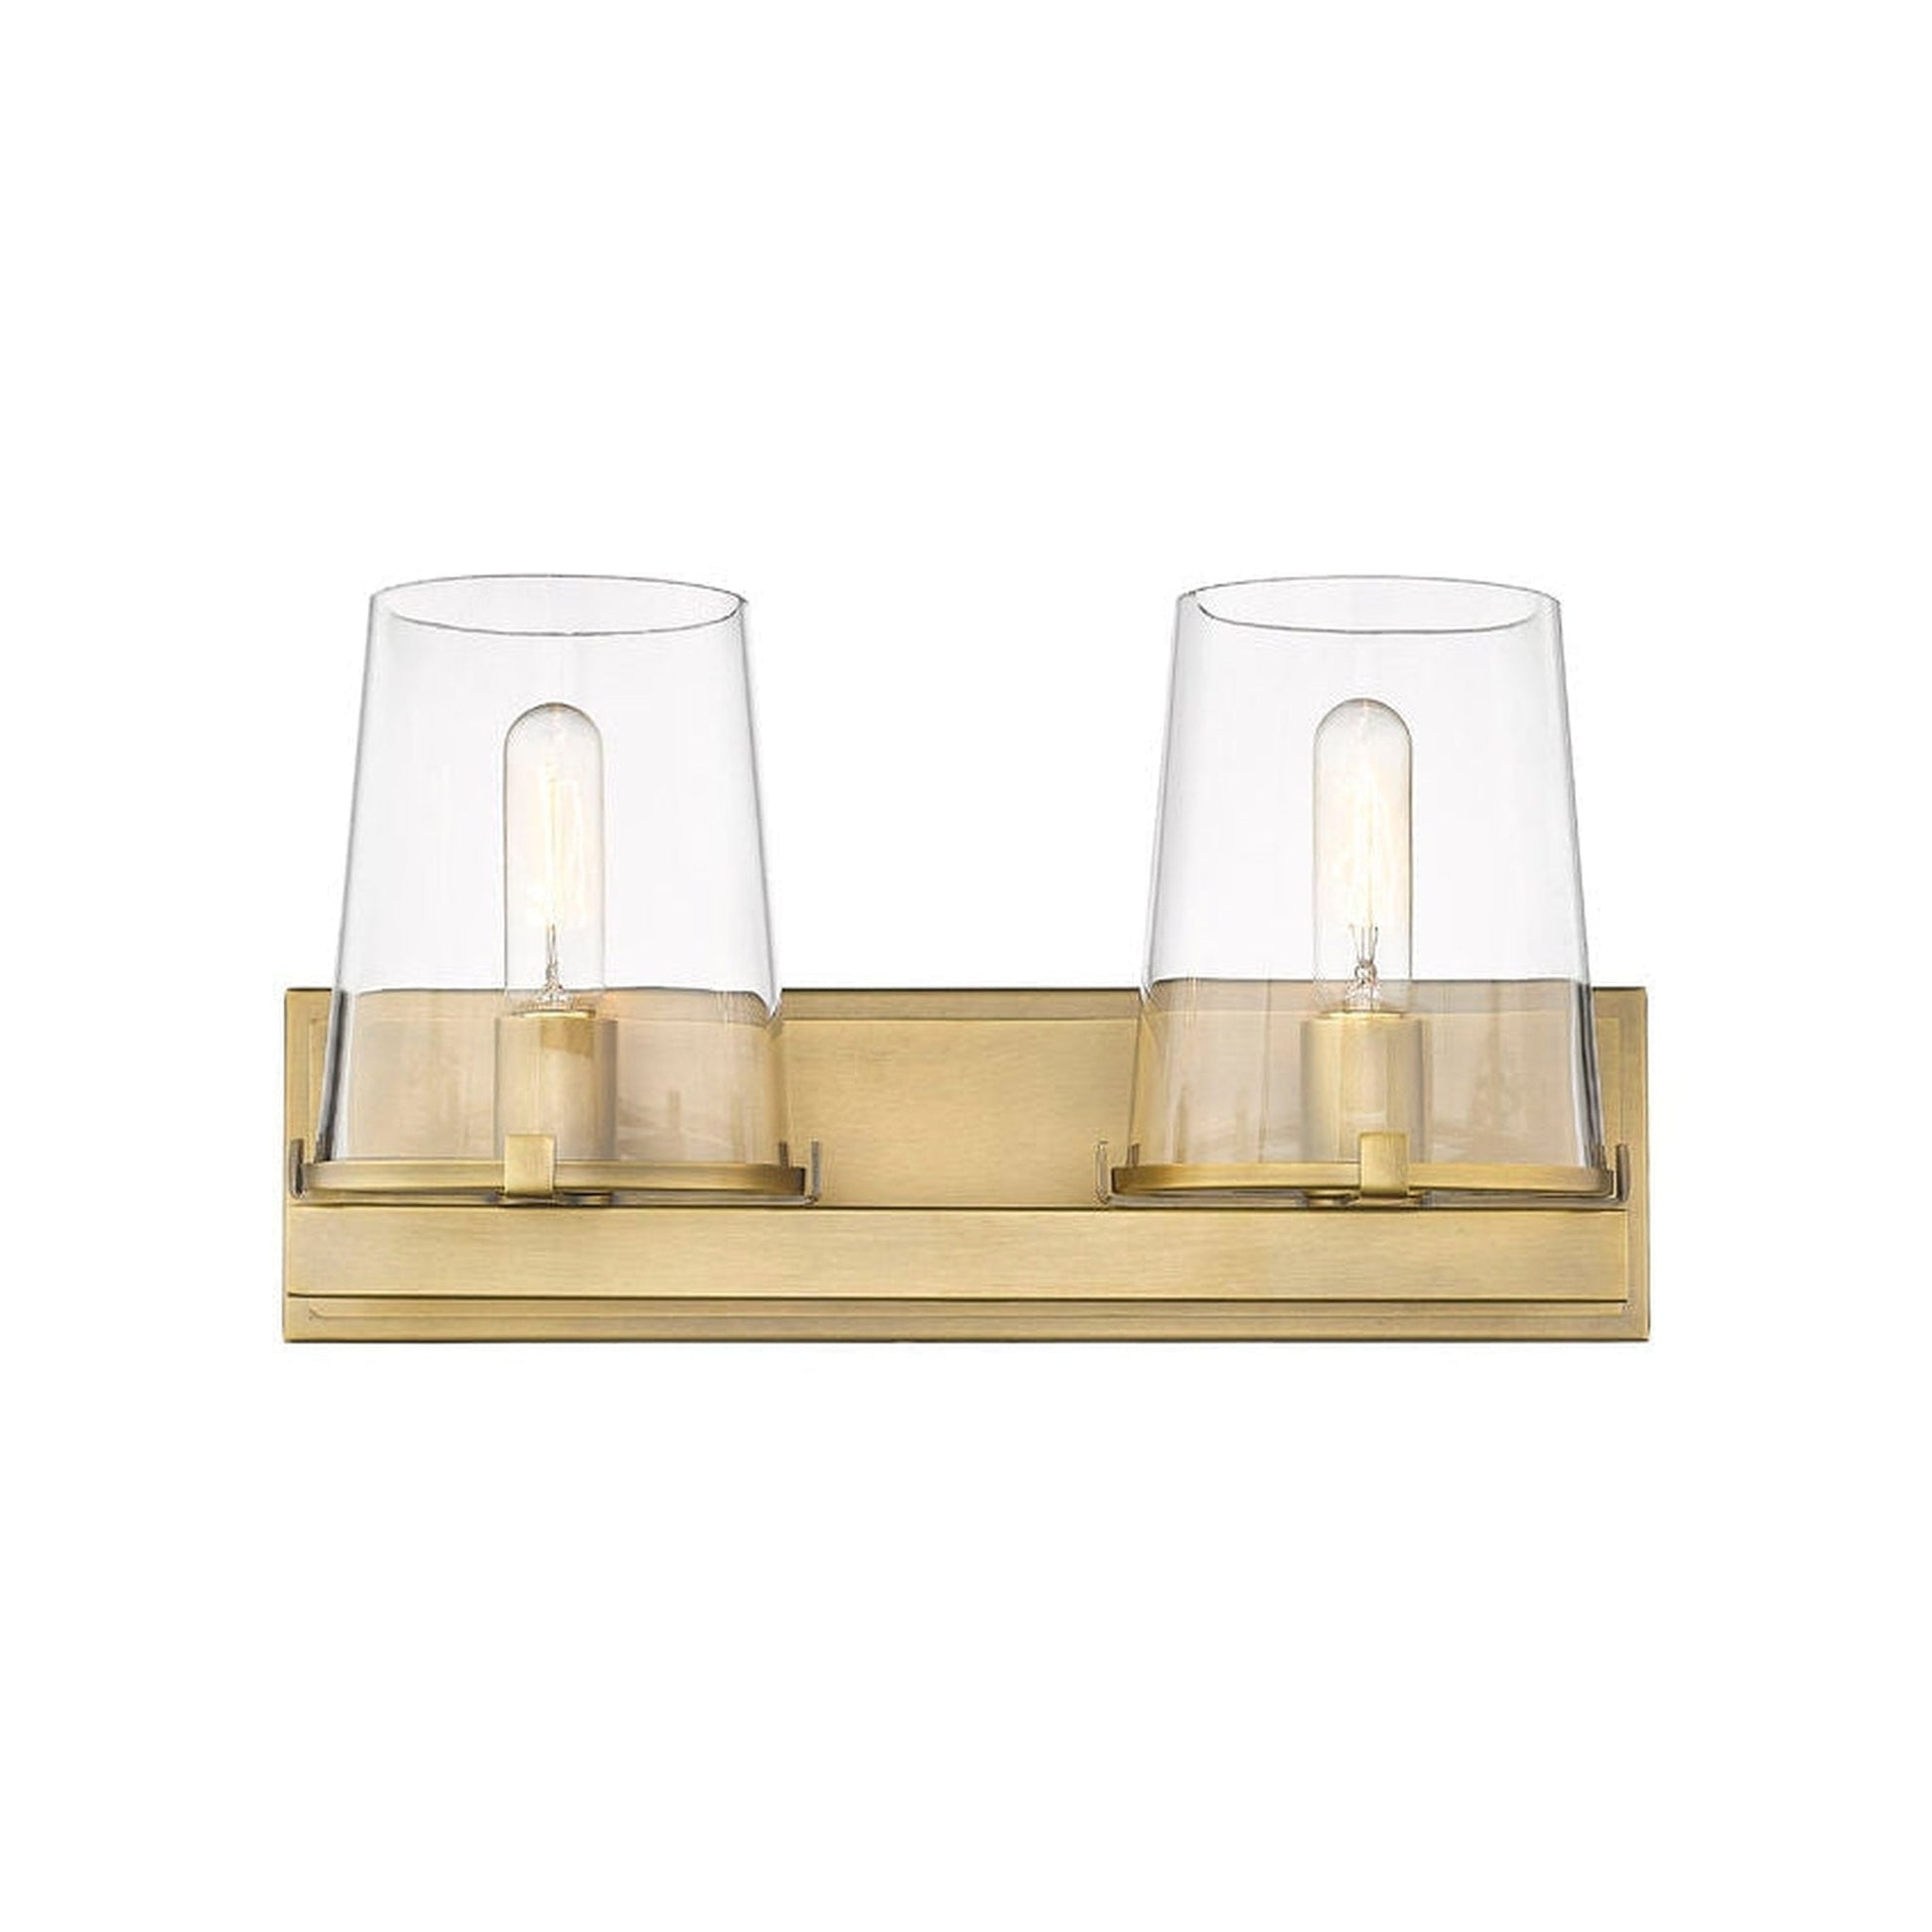 Z-Lite Callista 18" 2-Light Rubbed Brass Vanity Light With Clear Glass Shade